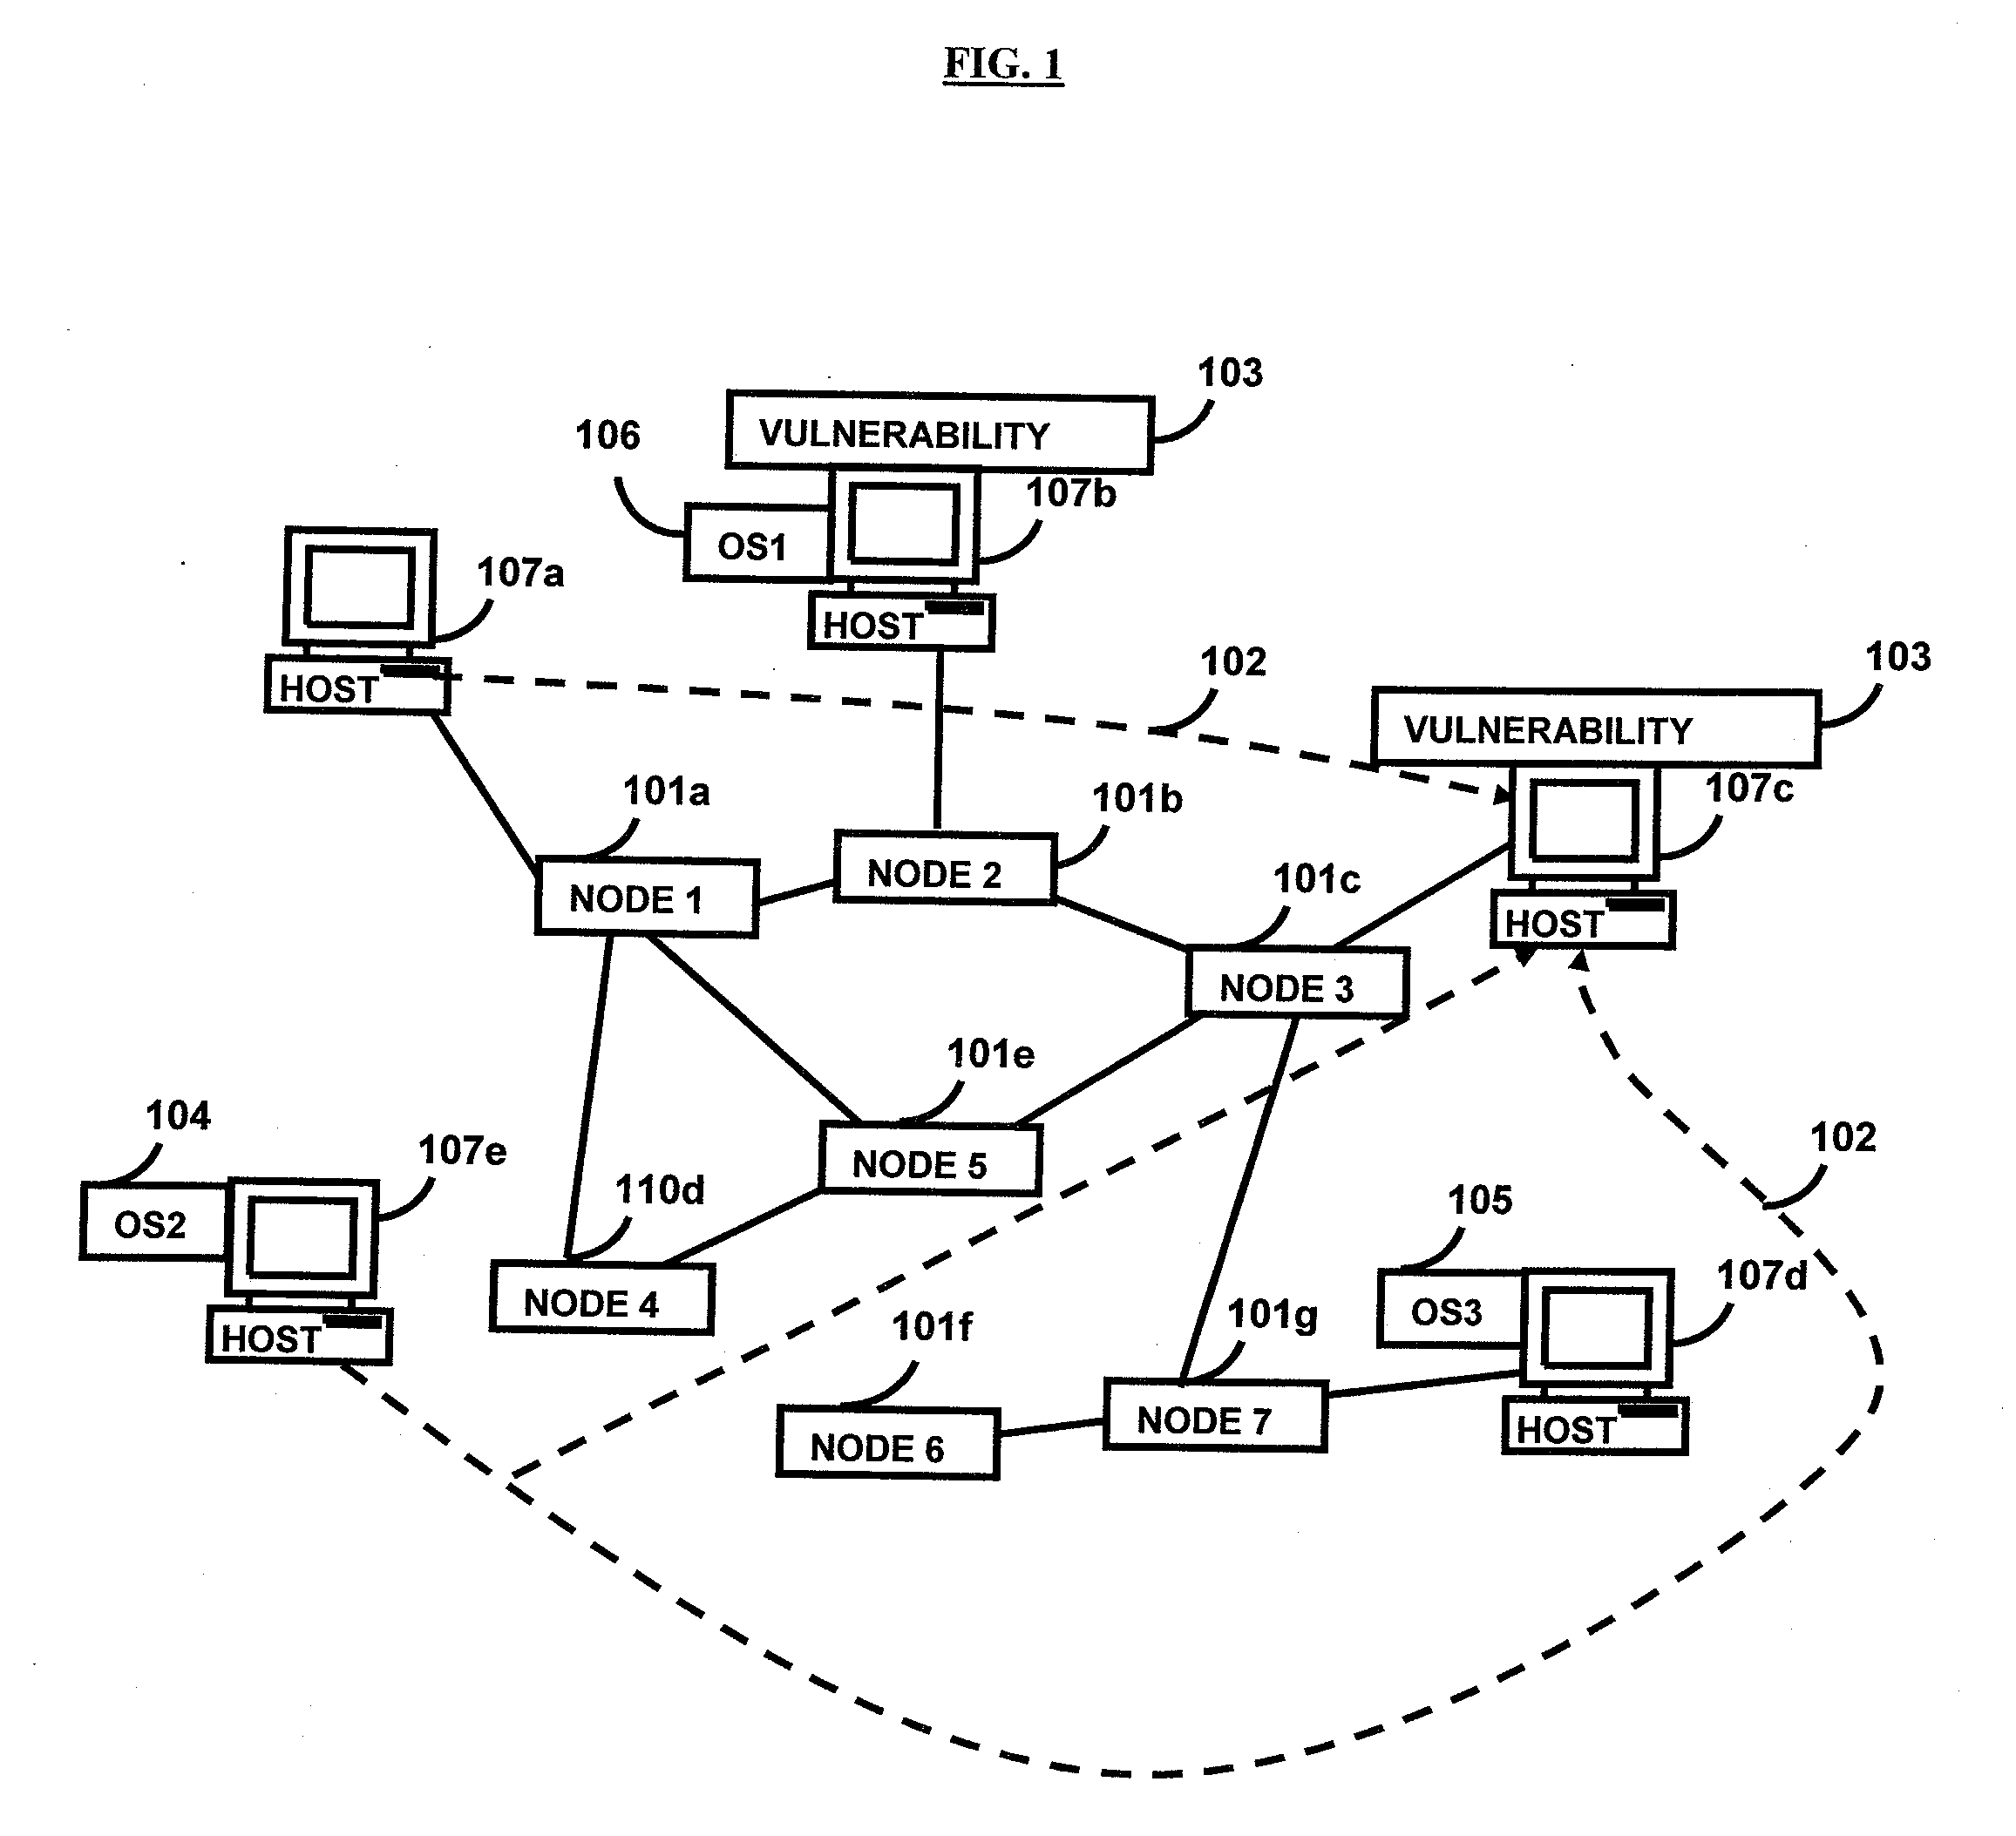 Filtering intrusion detection system events on a single host